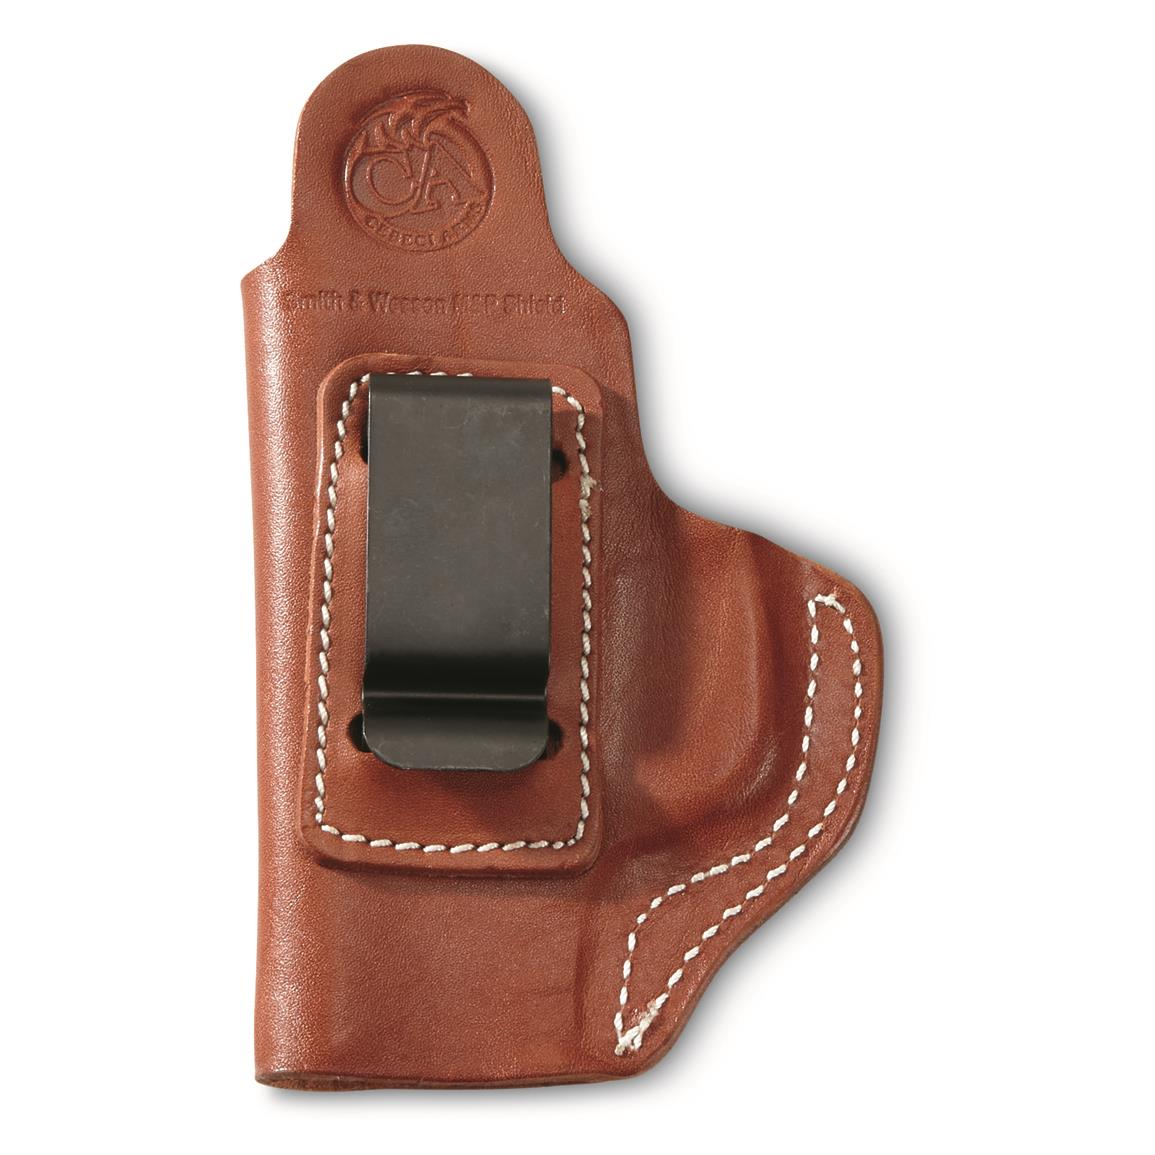 Cebeci Arms Leather OWB Holster, S&W M&P Shield 9mm, Right Hand